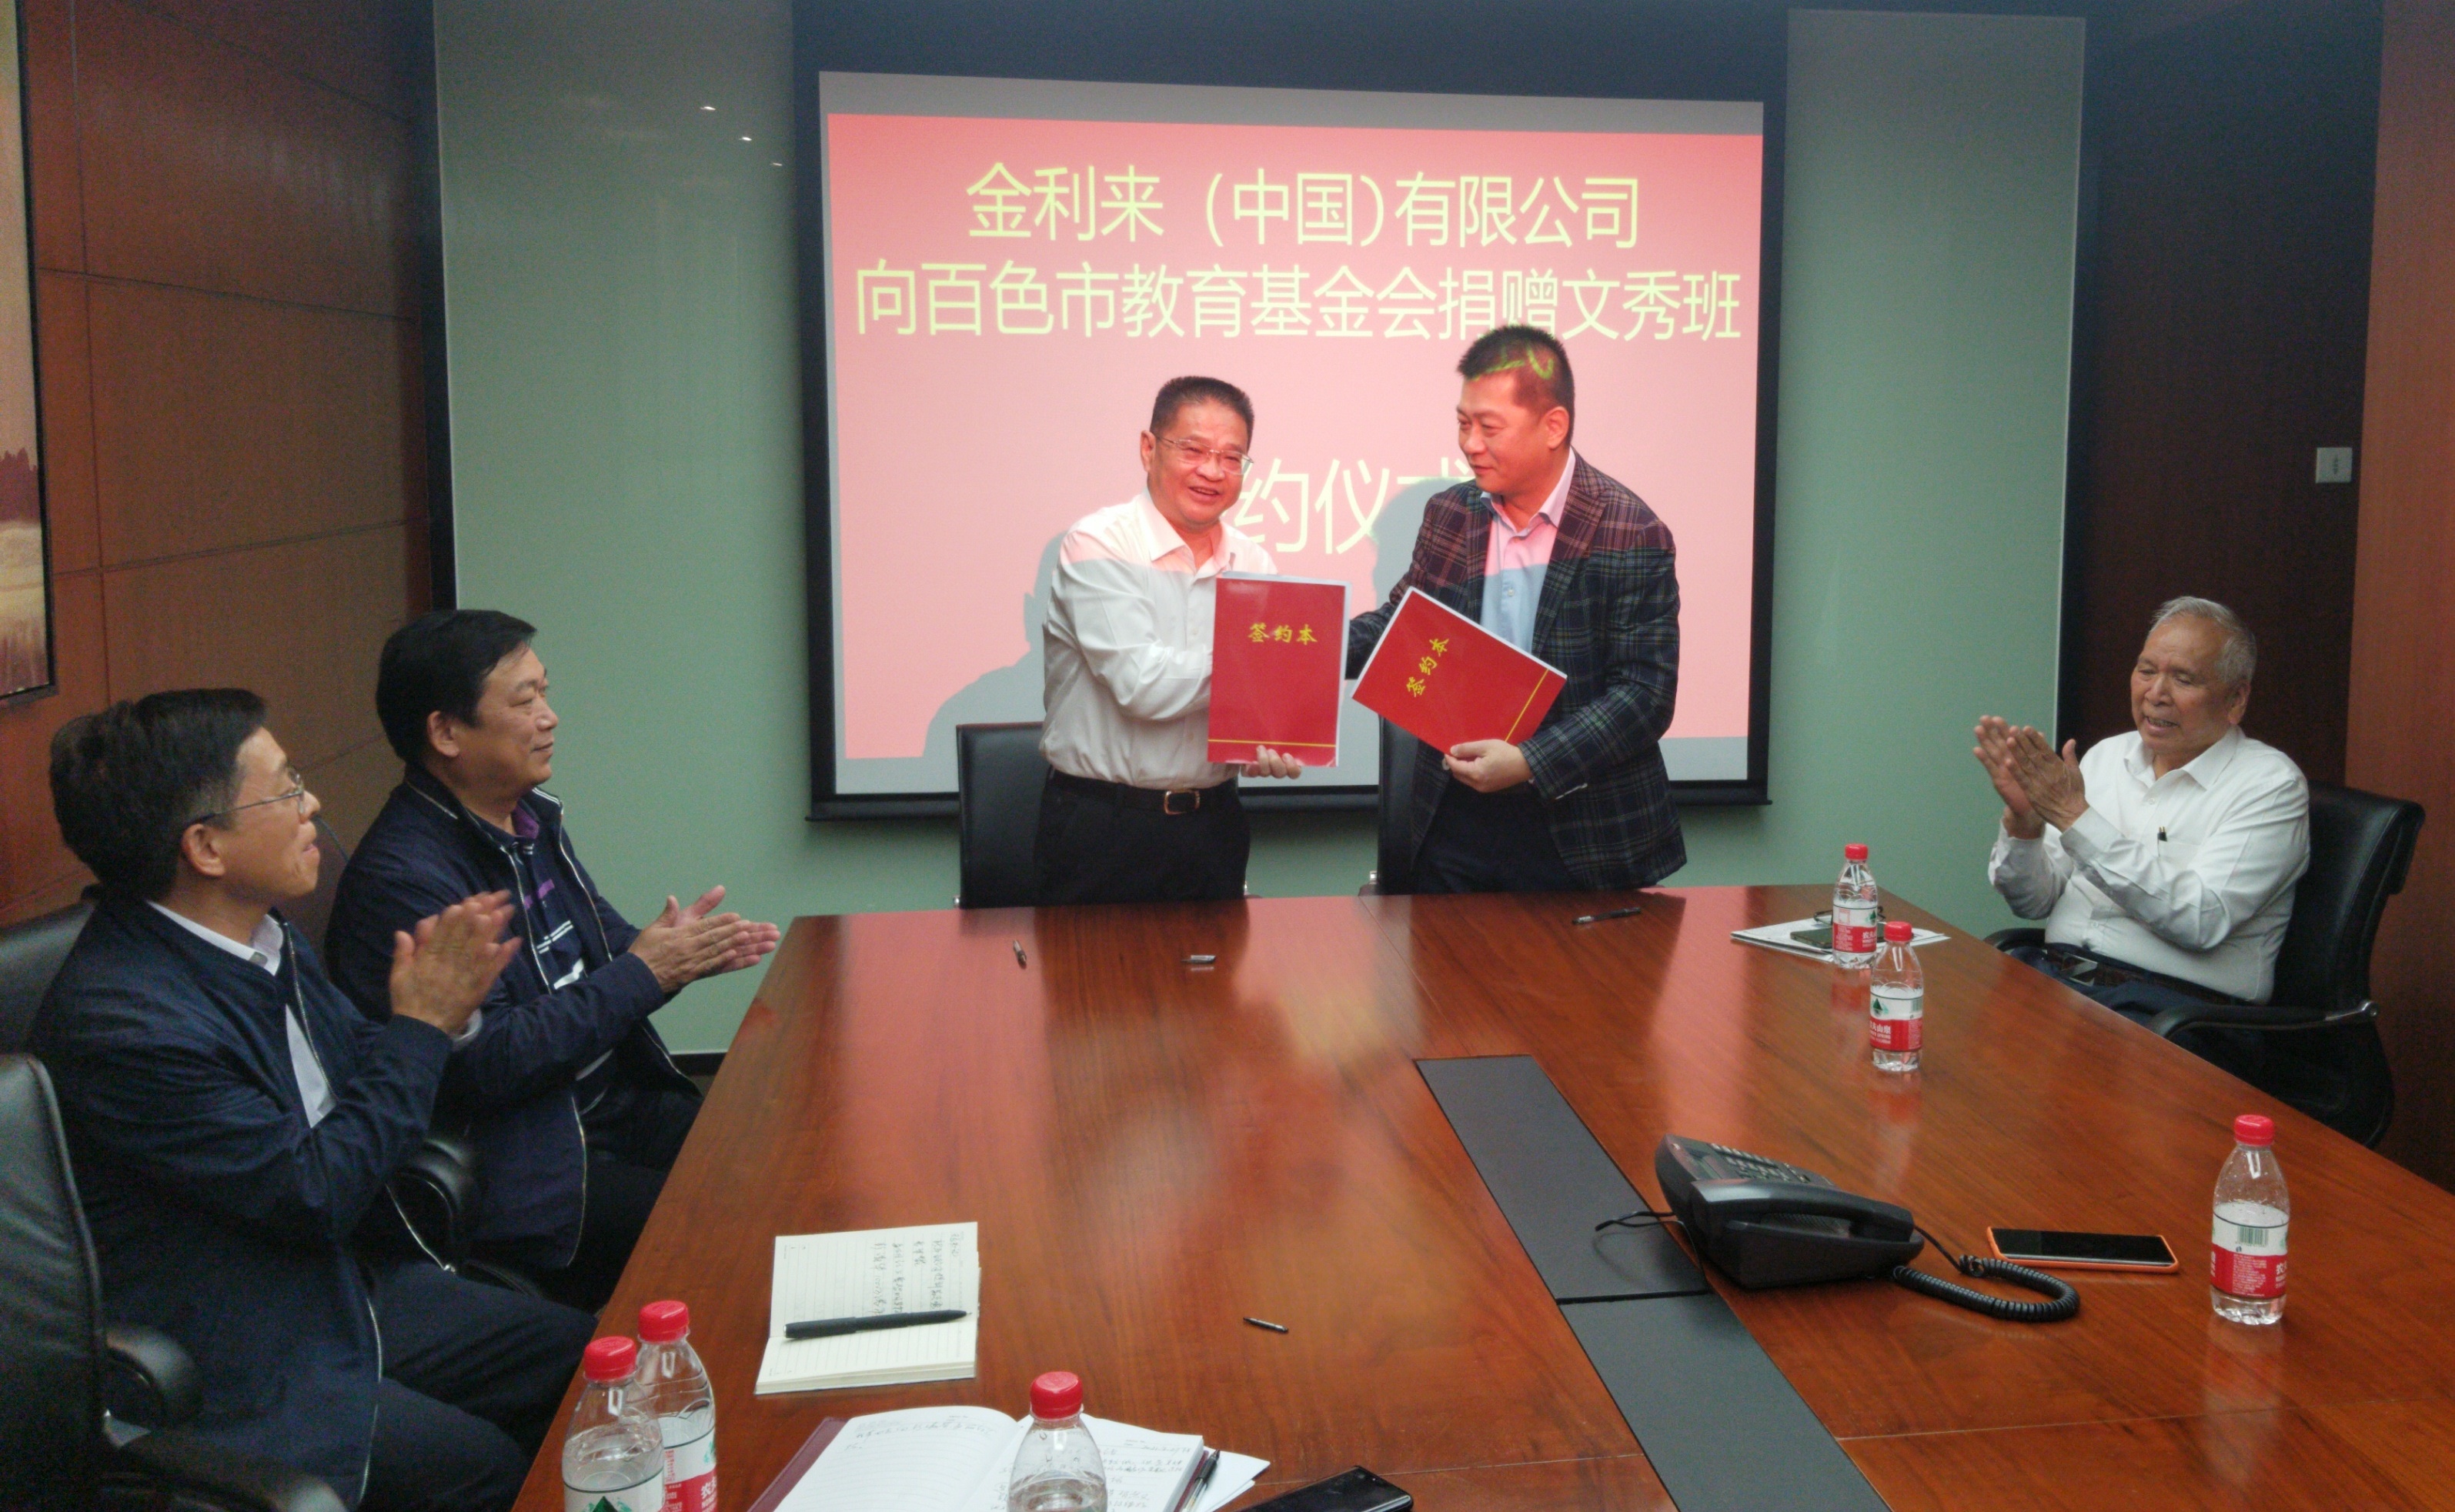 In March 2021, Goldlion donated RMB 2.25 million to the Baise Education Foundation to support 250 students from poor families with excellent academic performance